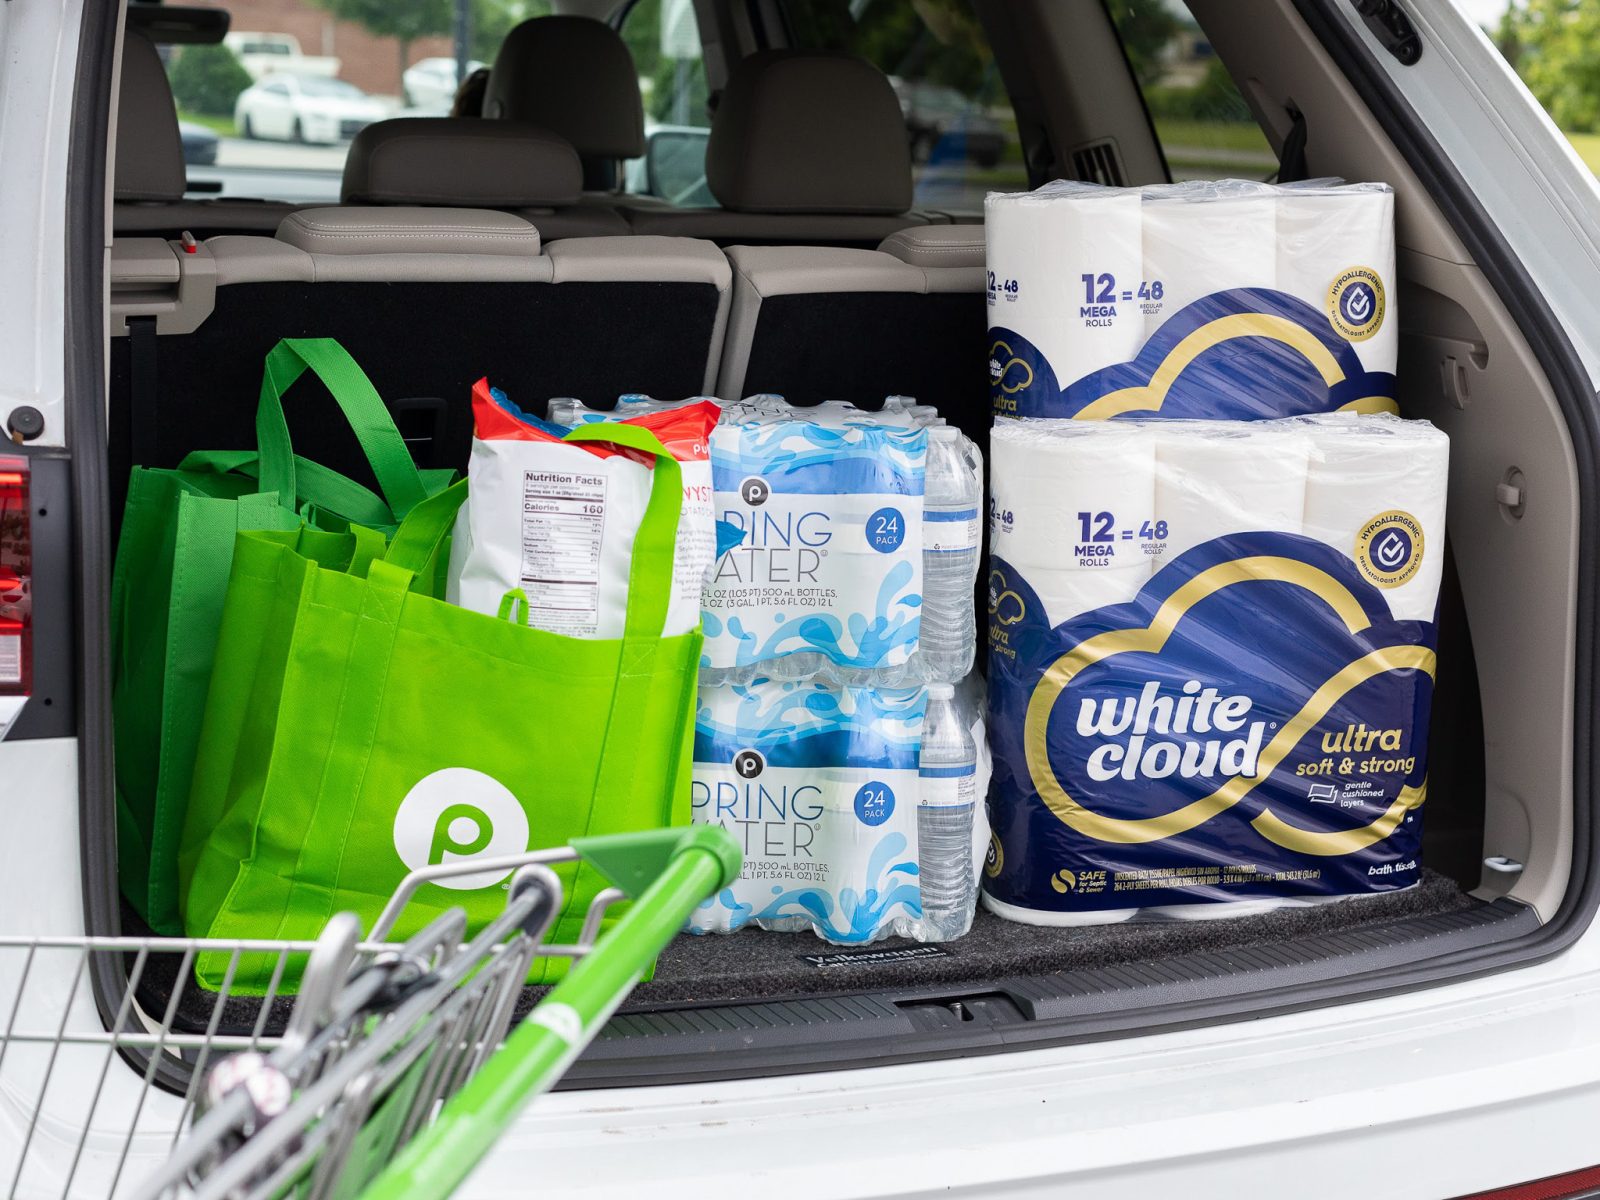 Stay Comfortable During Storm Season With White Cloud® Ultra Soft & Strong Bath Tissue – Stock Up And Save $5 At Publix